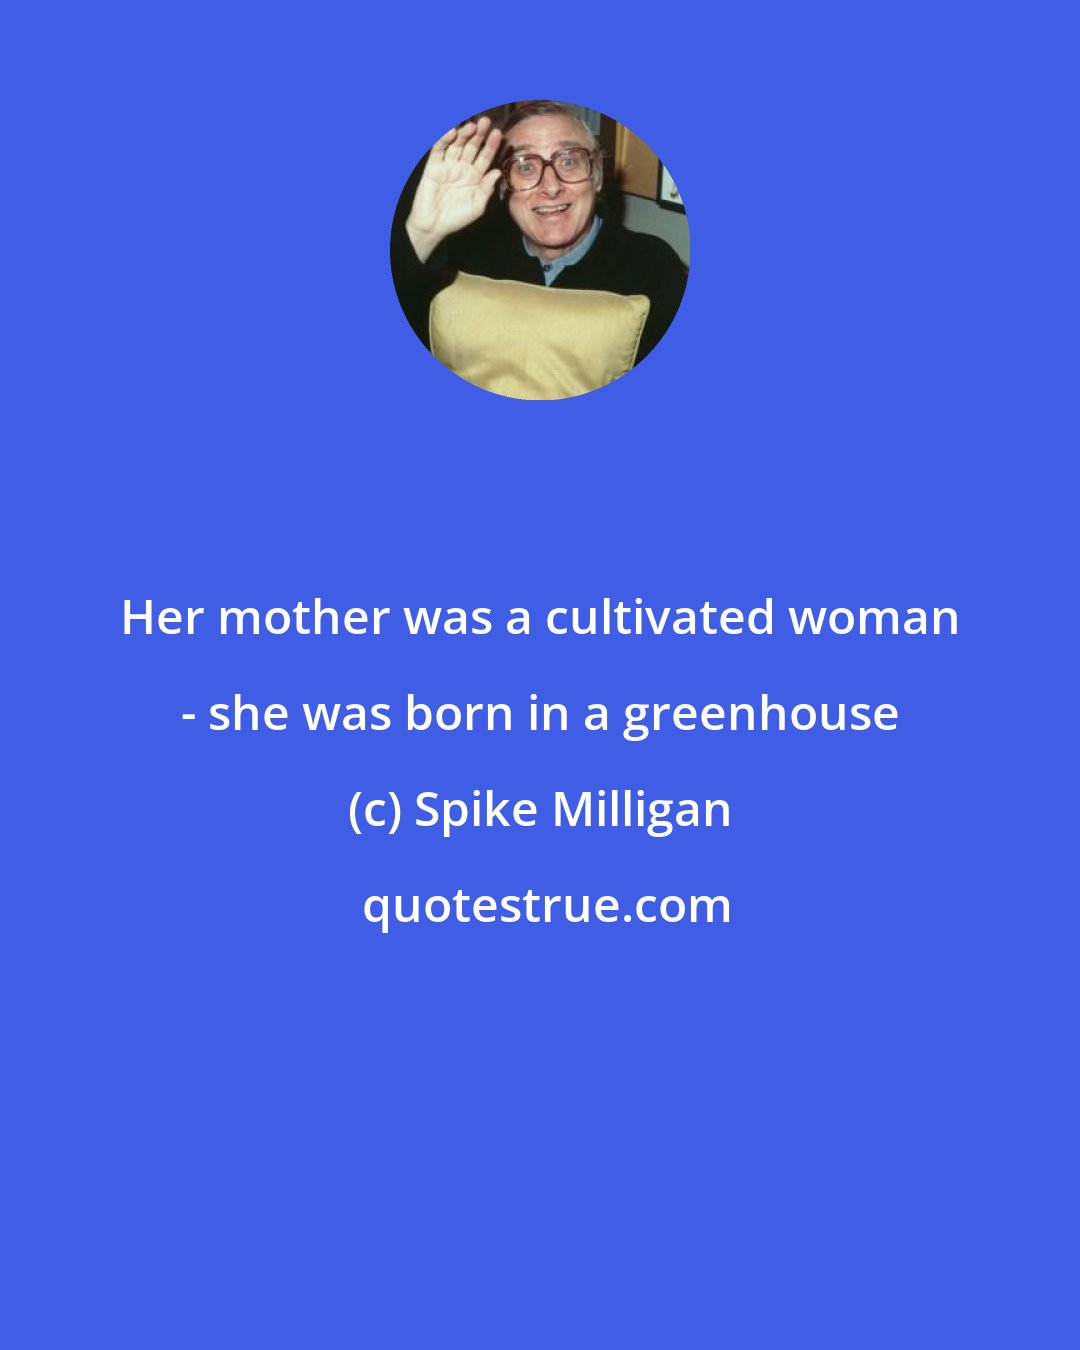 Spike Milligan: Her mother was a cultivated woman - she was born in a greenhouse